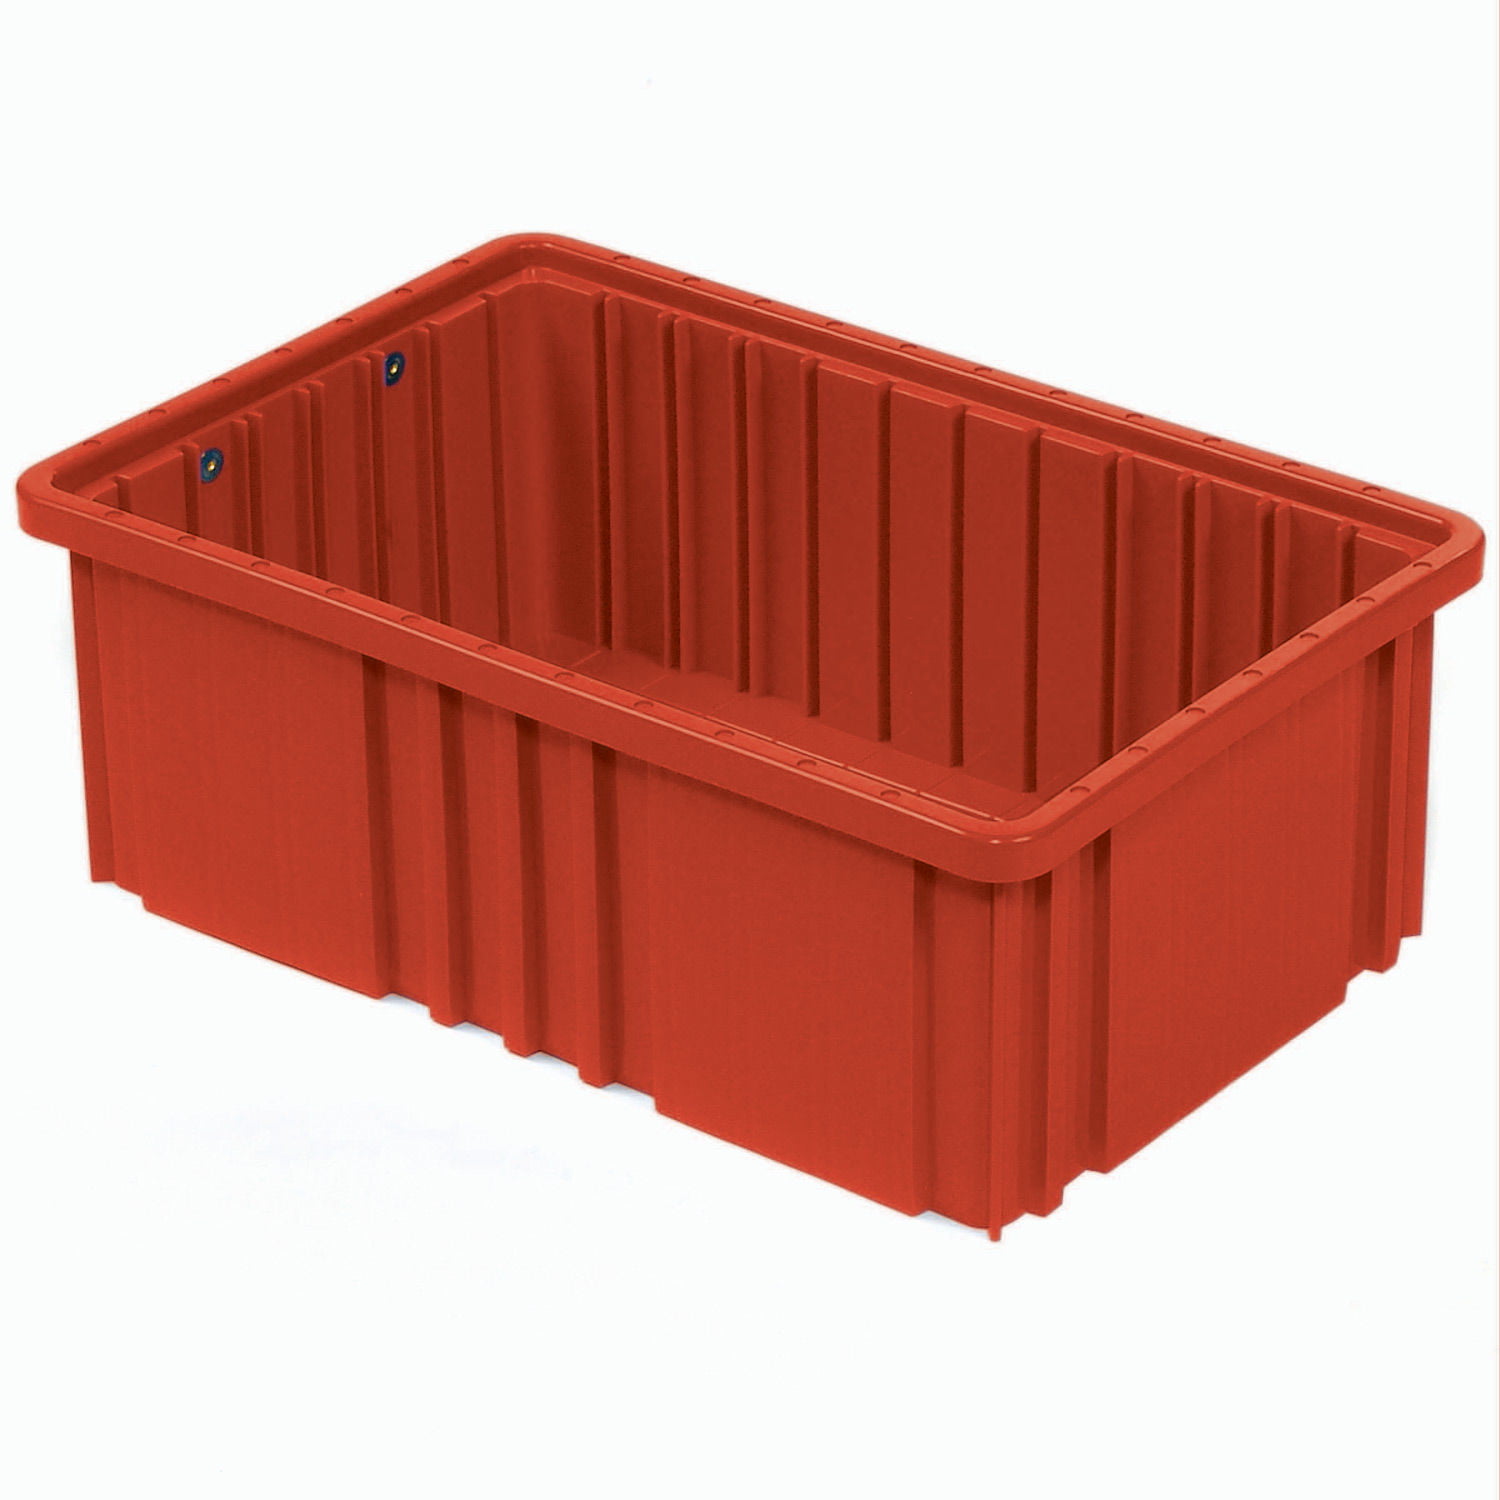 Red Lot of 20 10-7/8"L x 8-1/4"W x 3-1/2"H Plastic Dividable Grid Container 